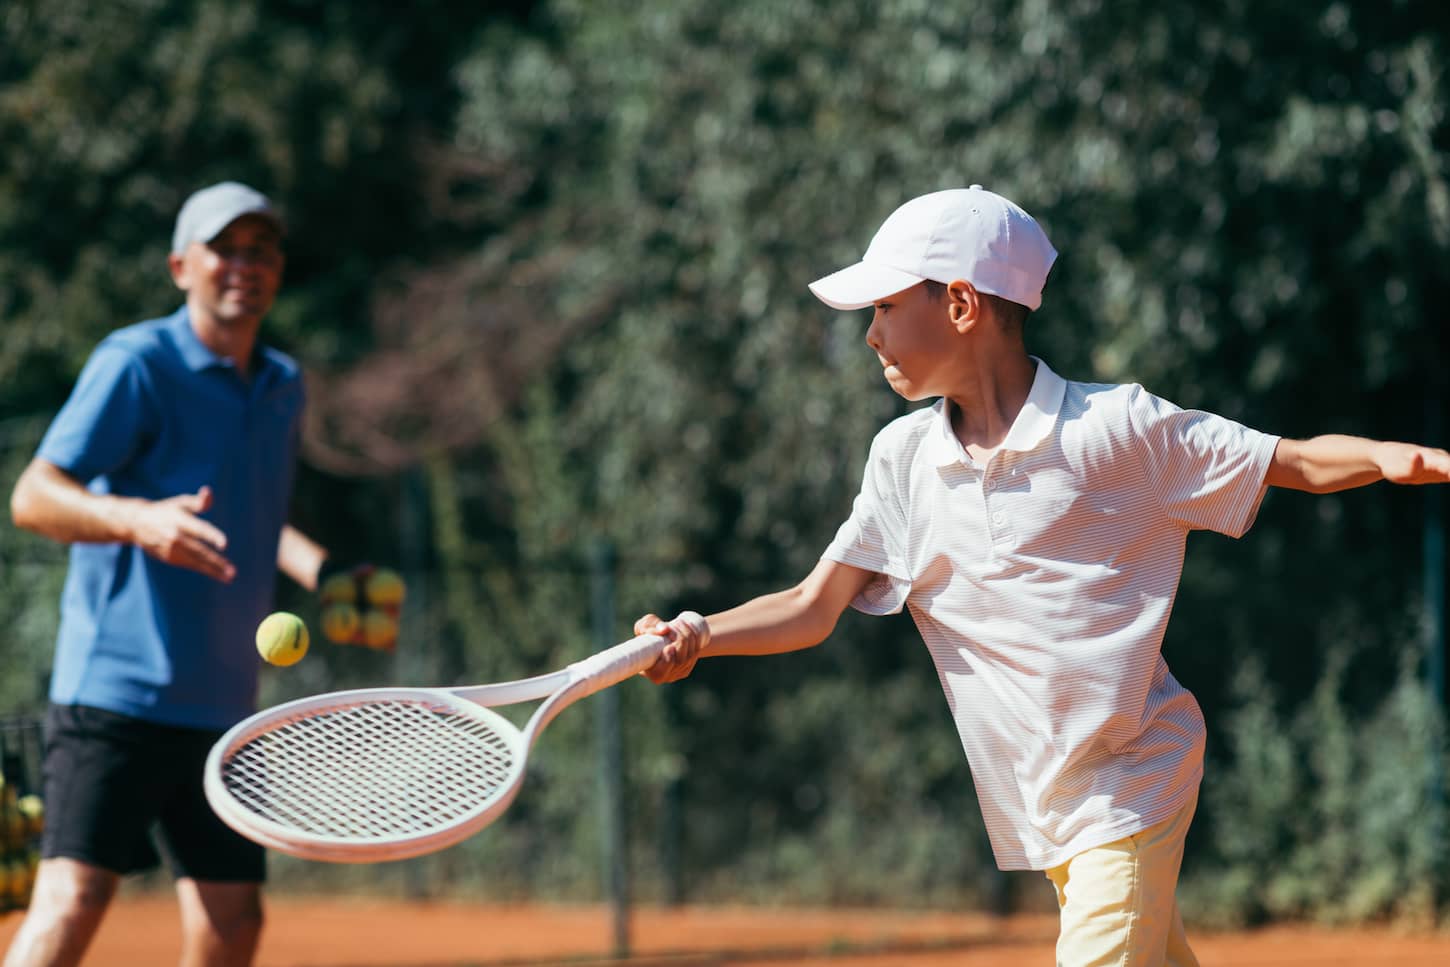 An image of a Tennis Instructor with a Boy Having a Tennis Lesson on a Clay Court.